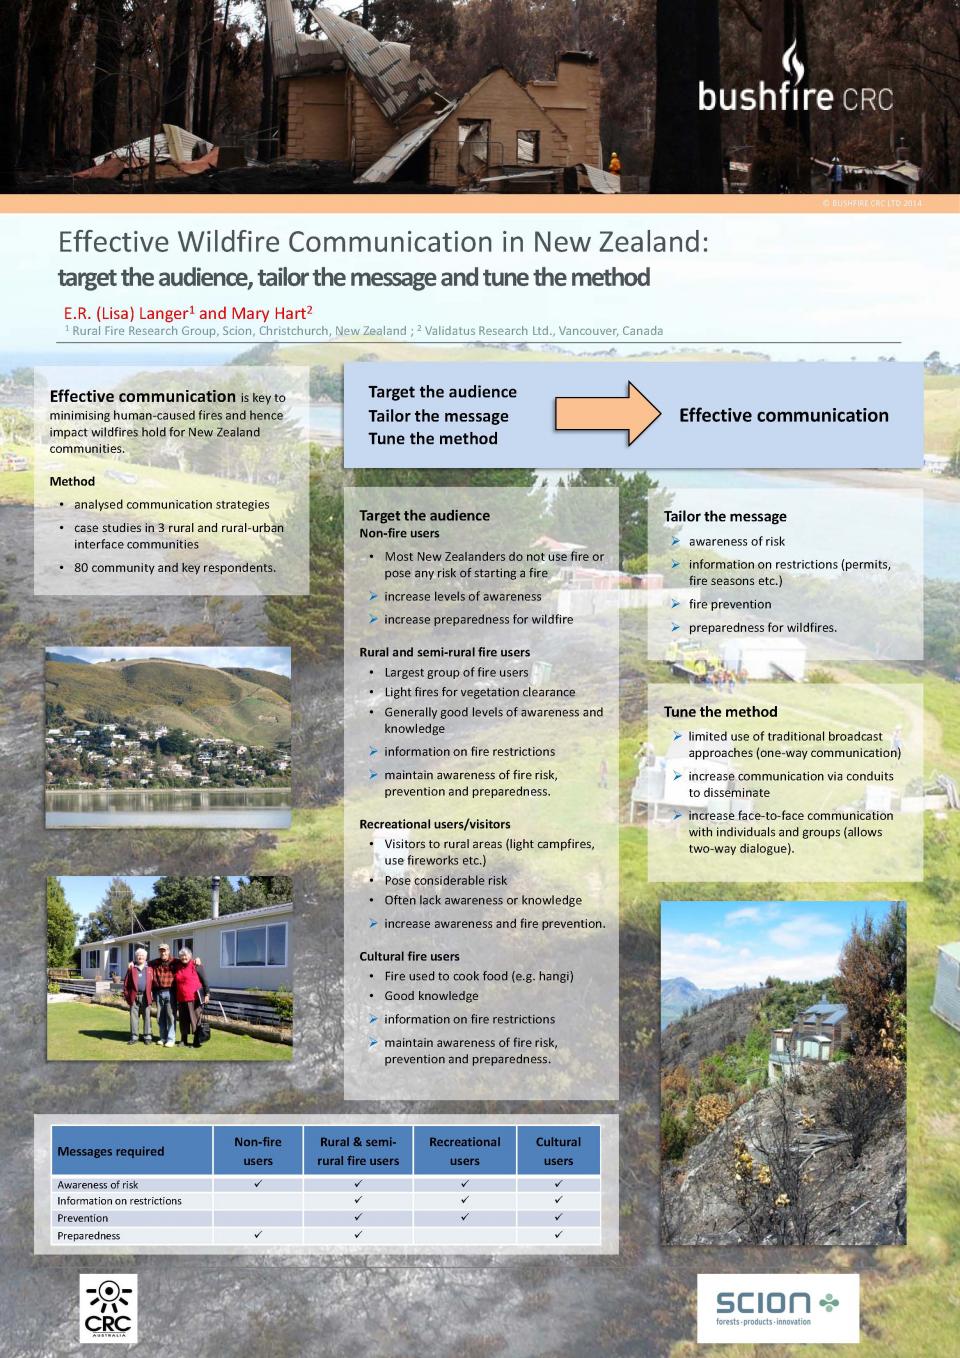 Effective wildfire communication in New Zealand: Target the audience, tailor the message and tune the method